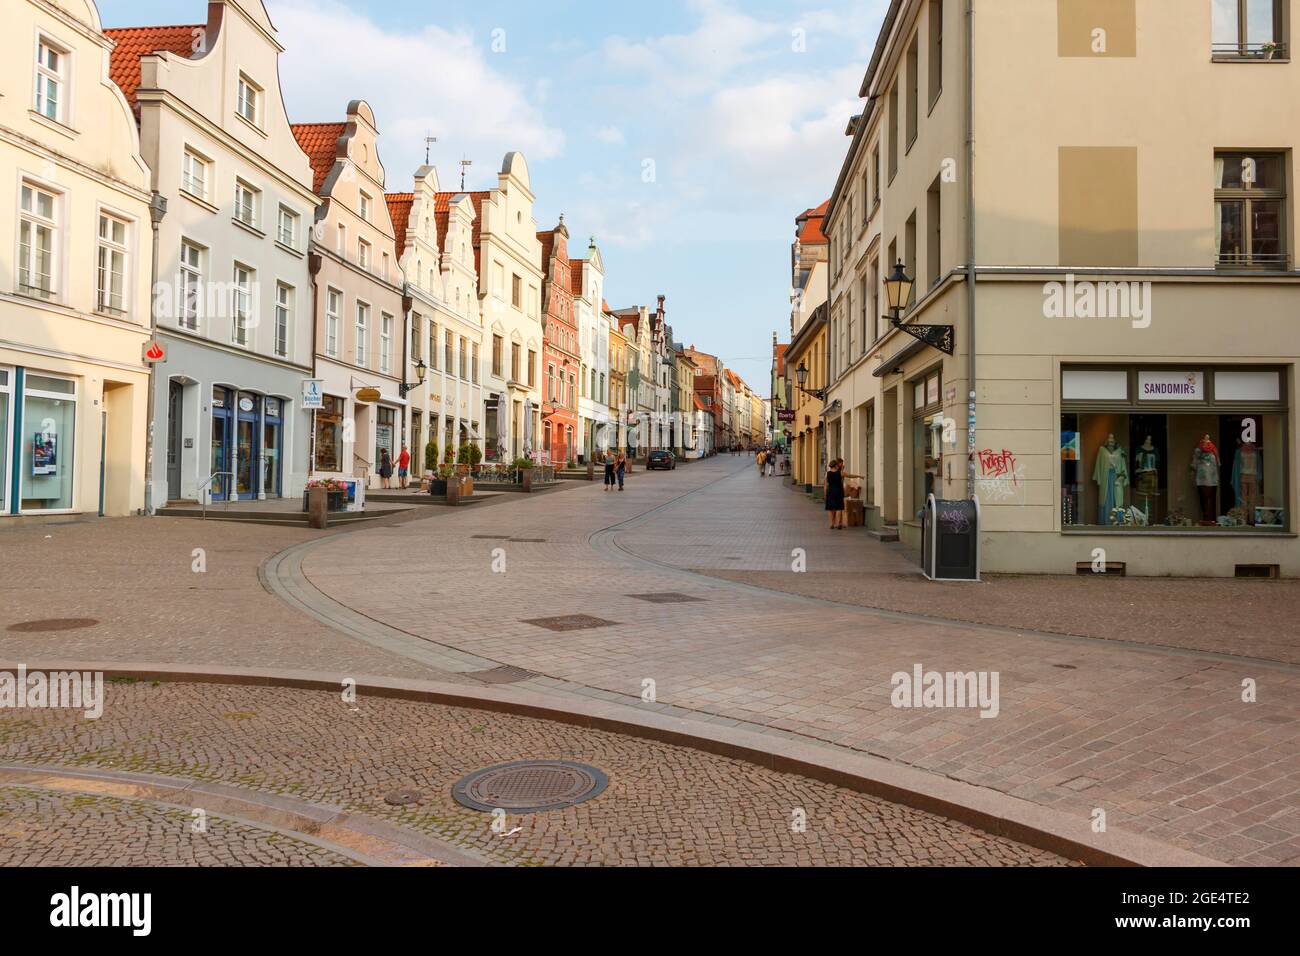 Wismar, Germany - July 12, 2021: The streets of old Wismar Stock Photo